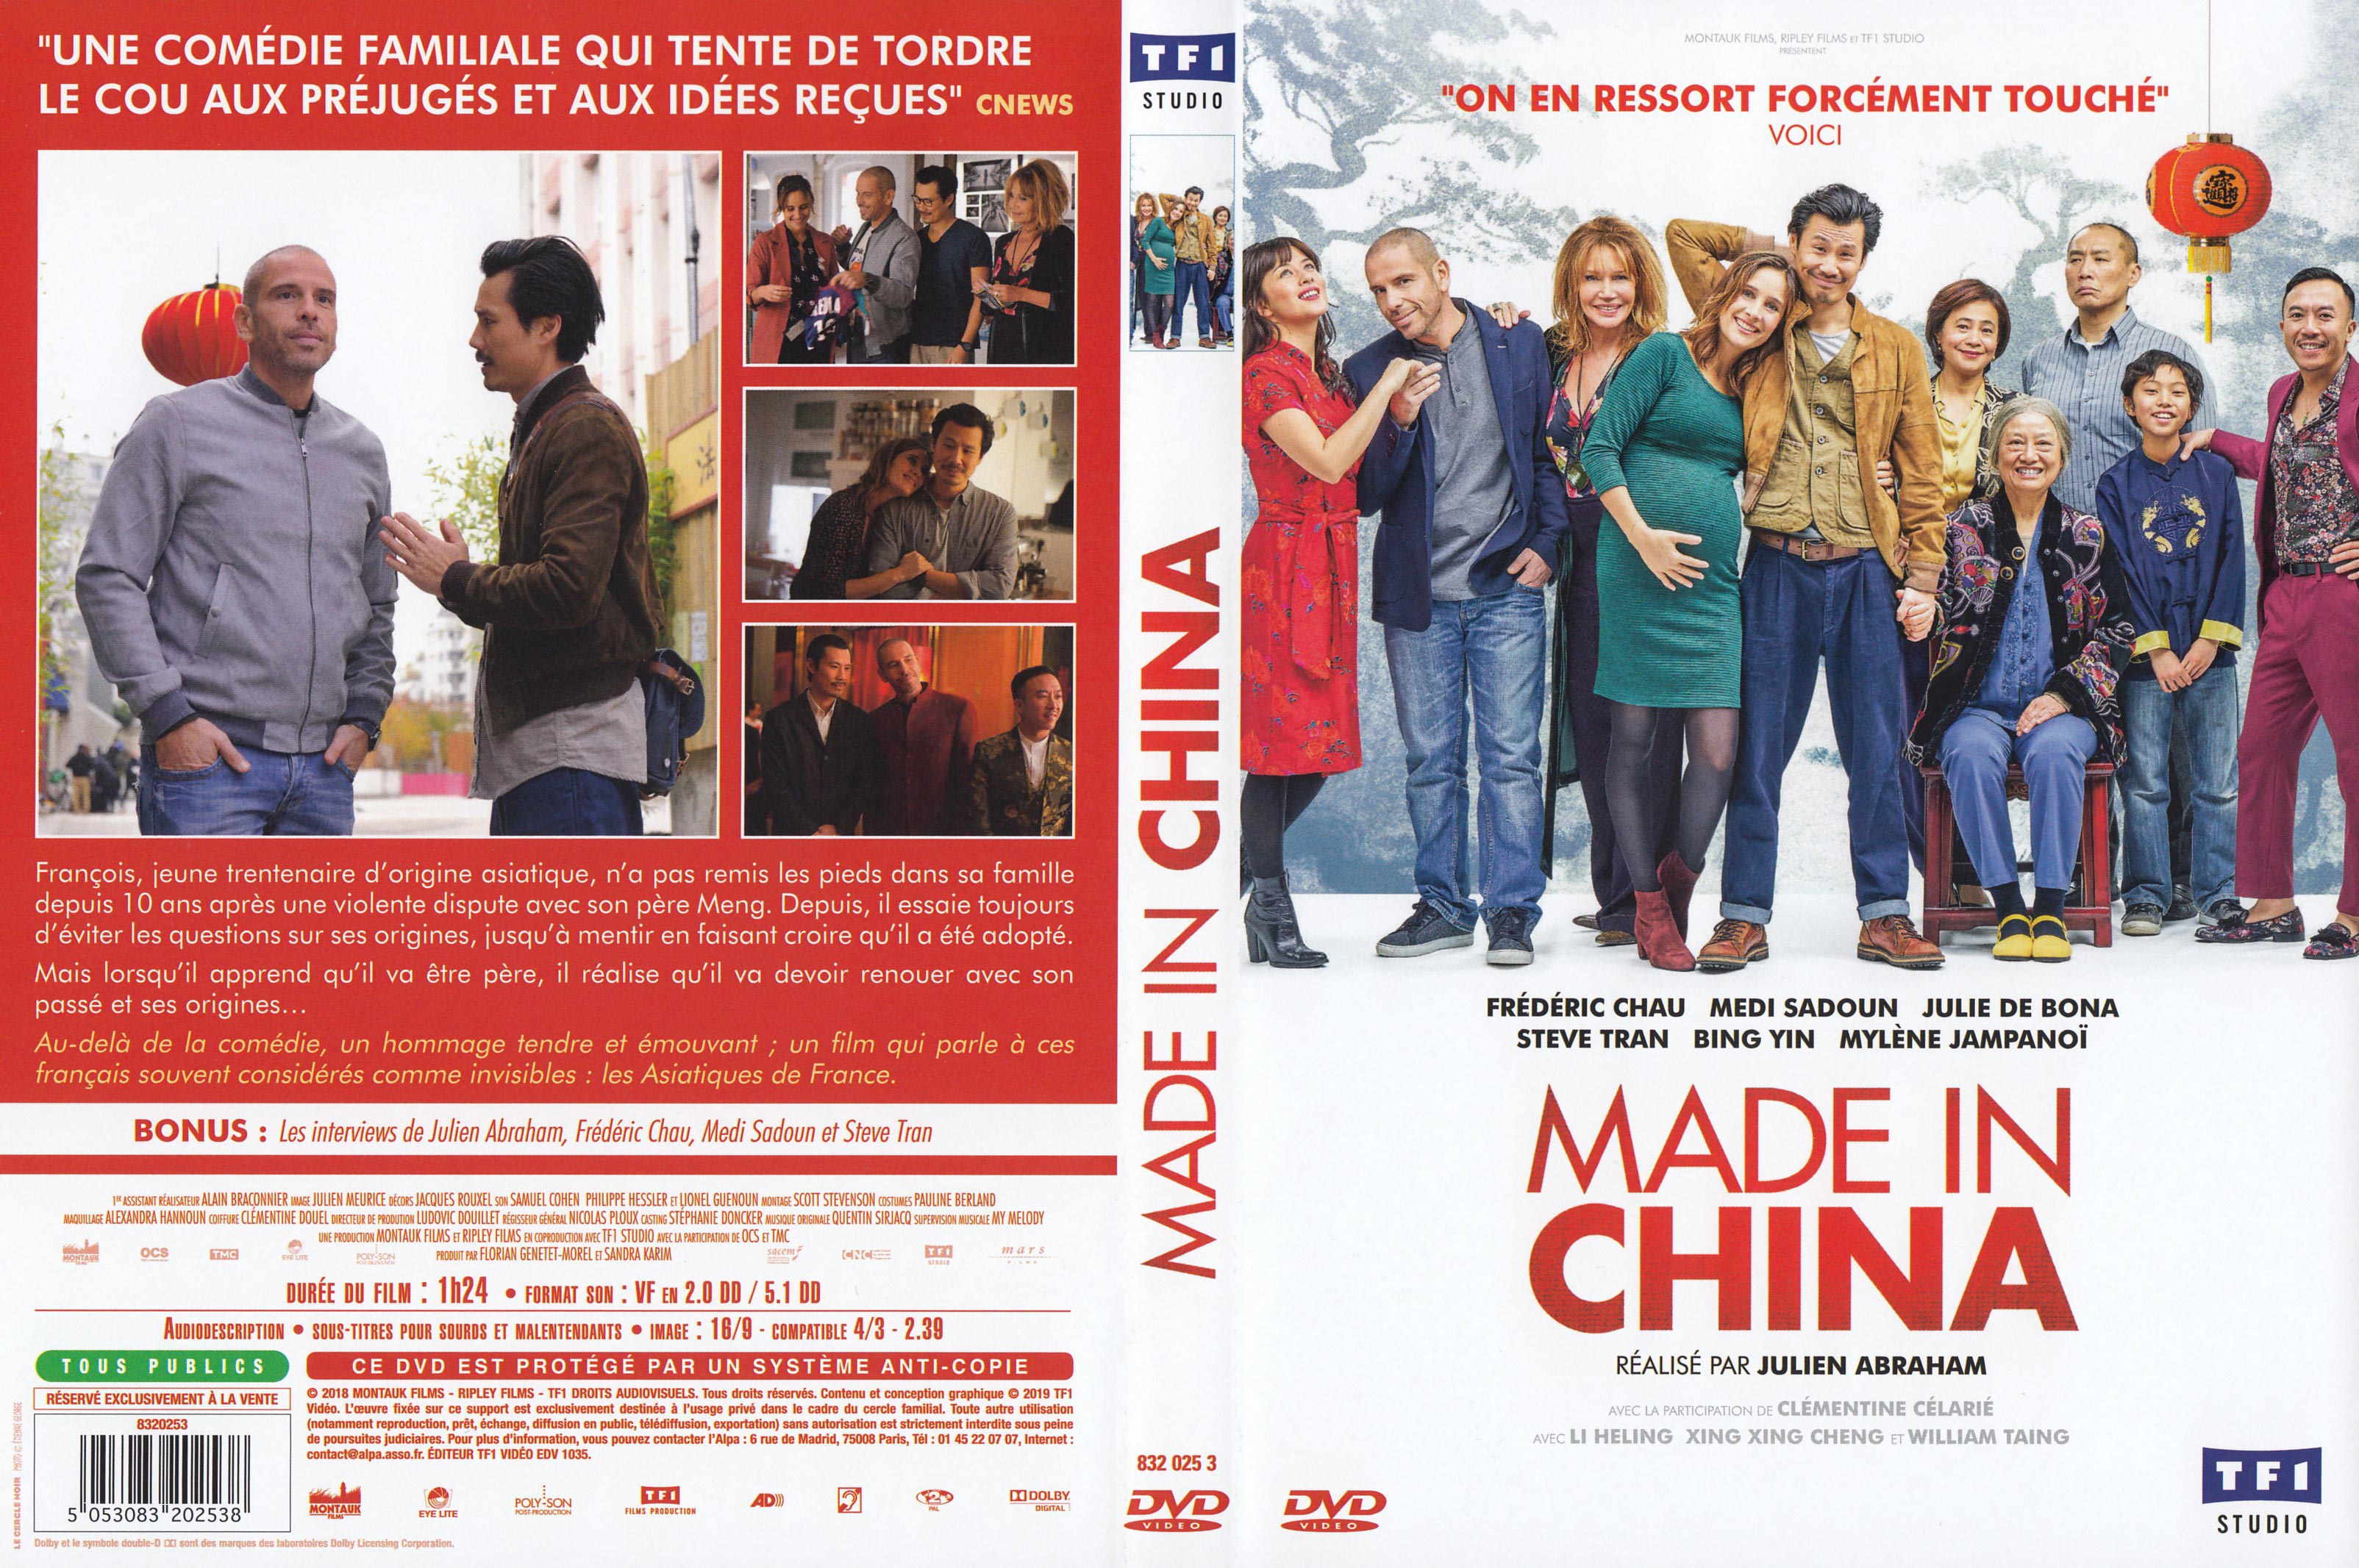 Jaquette DVD Made in china